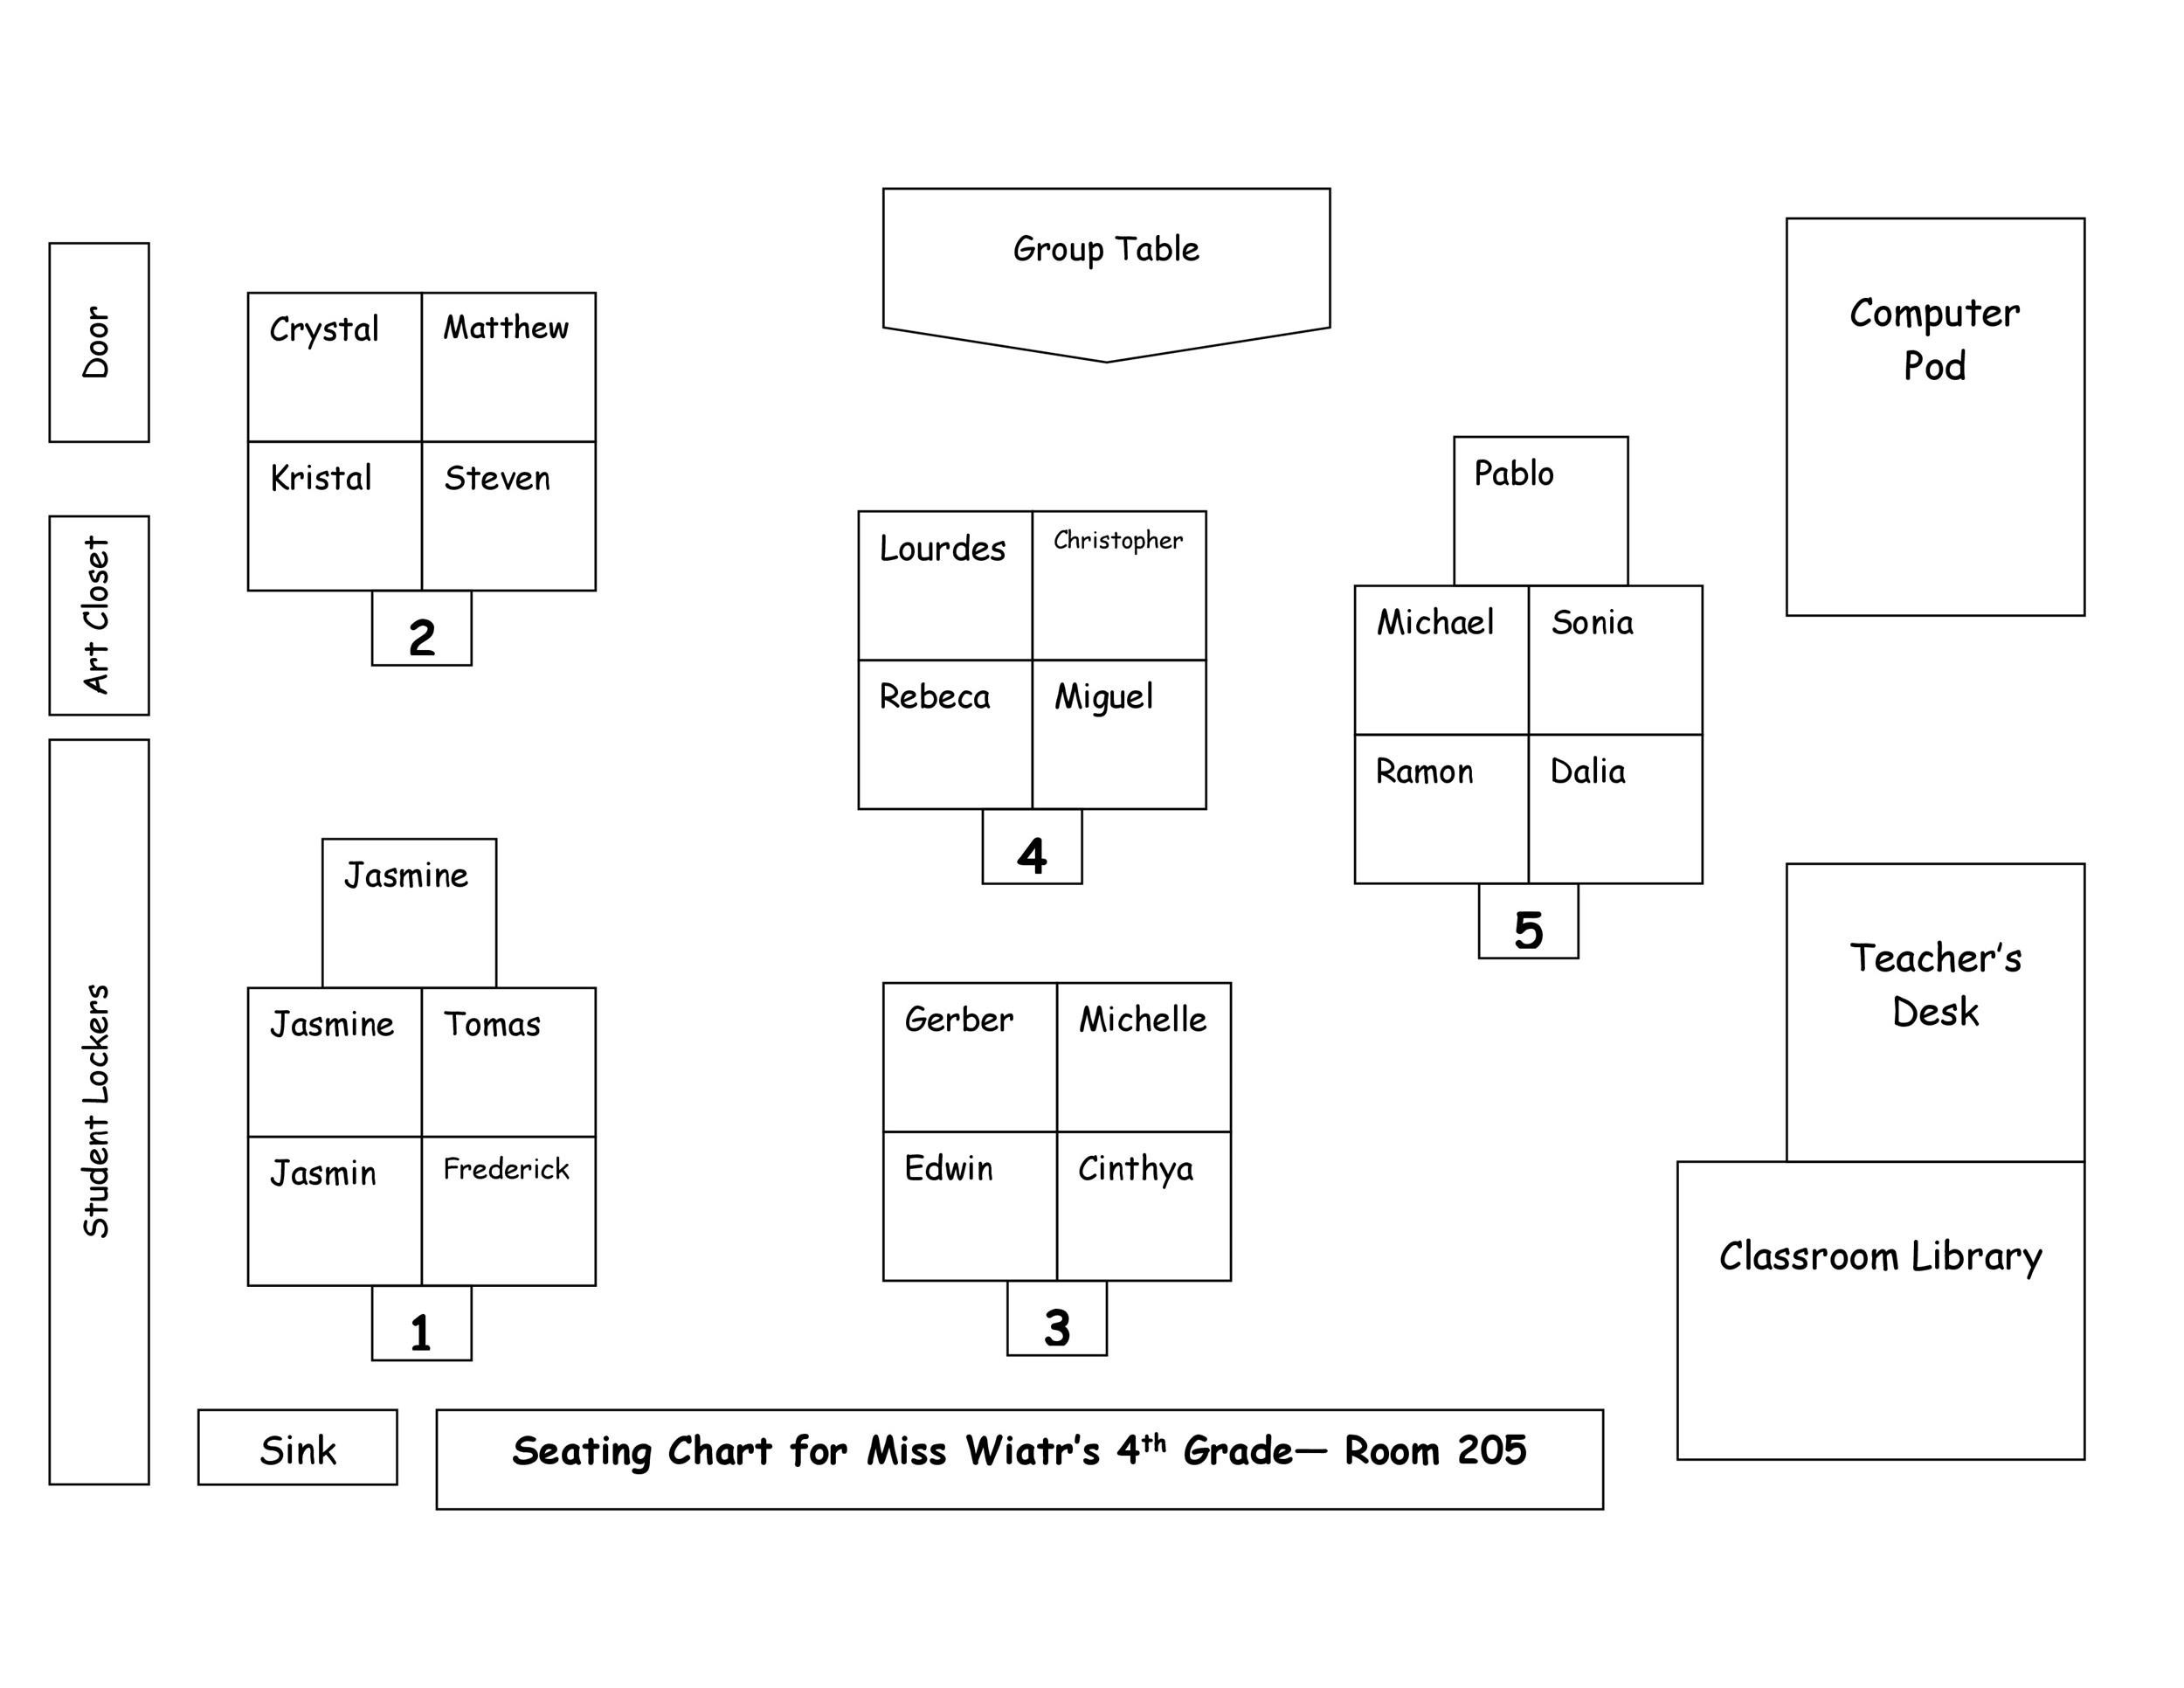 40 Great Seating Chart Templates Wedding Classroom More Computer lab seating chart template